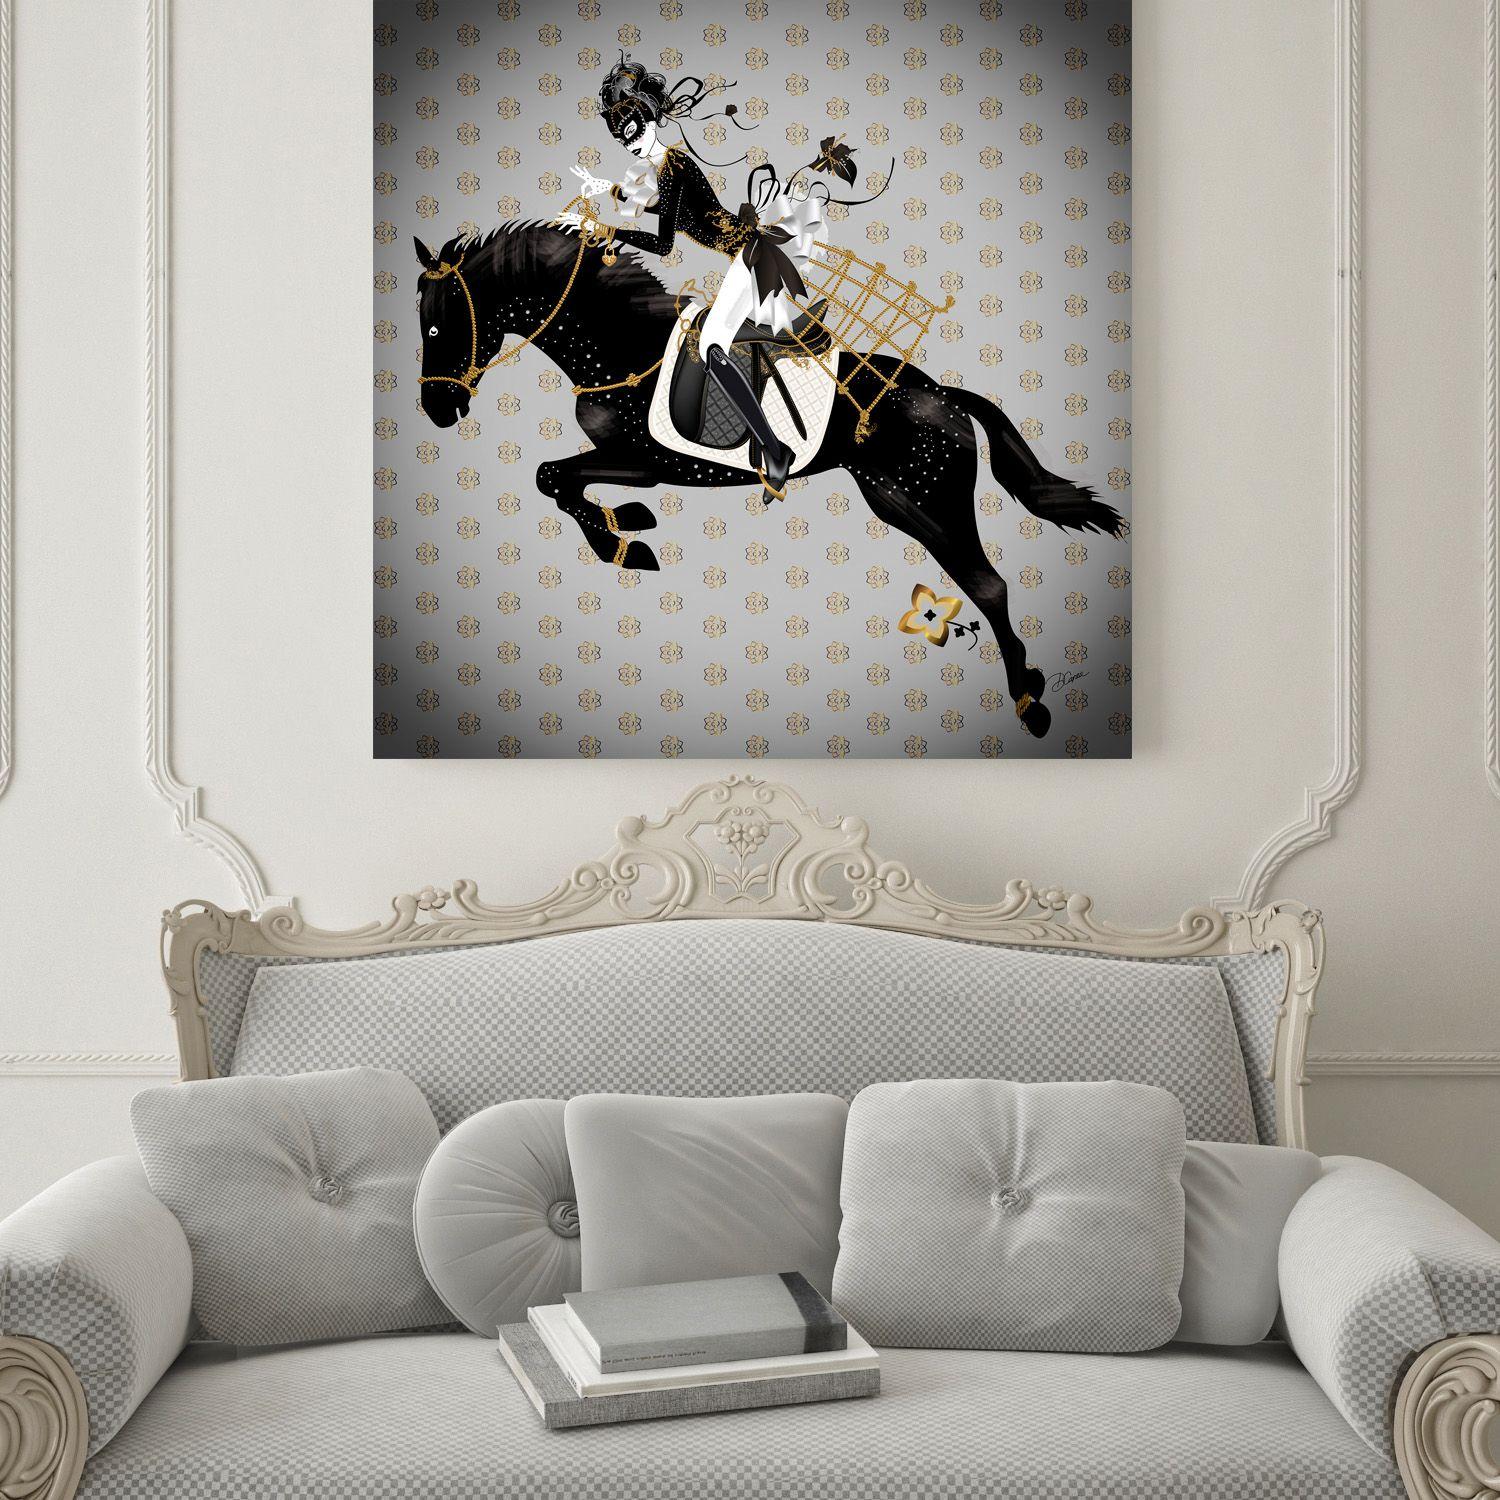 Made with passion and golden embroidery details, the Perfect Artdeco Gift!    Miss Black Knight - horse - riding - dressage  comes with certificate of authenticity signed by Artemisia.  One-of-a-Kind Artwork.    Dimensions are 31.4 x 31.4 in with 2